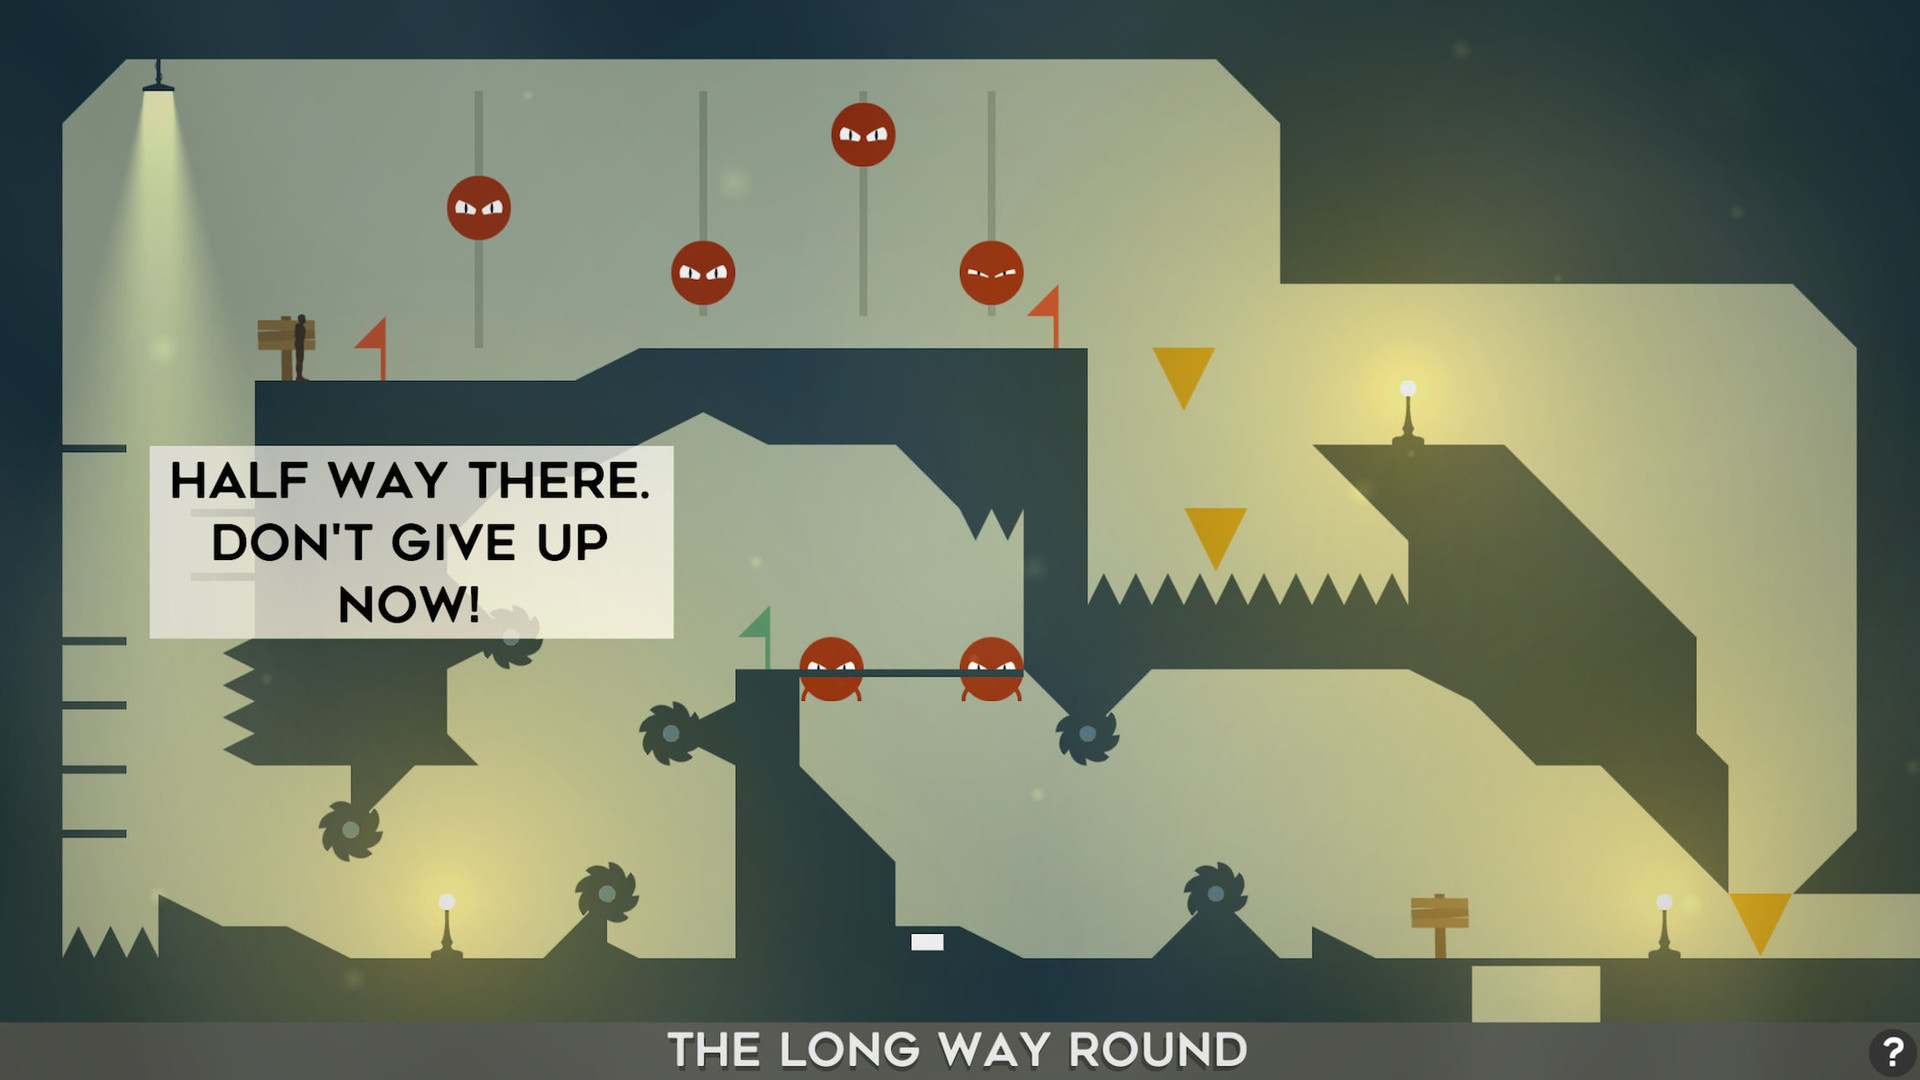 The other way round. Jumphobia. Флеш игра must-a-mine.